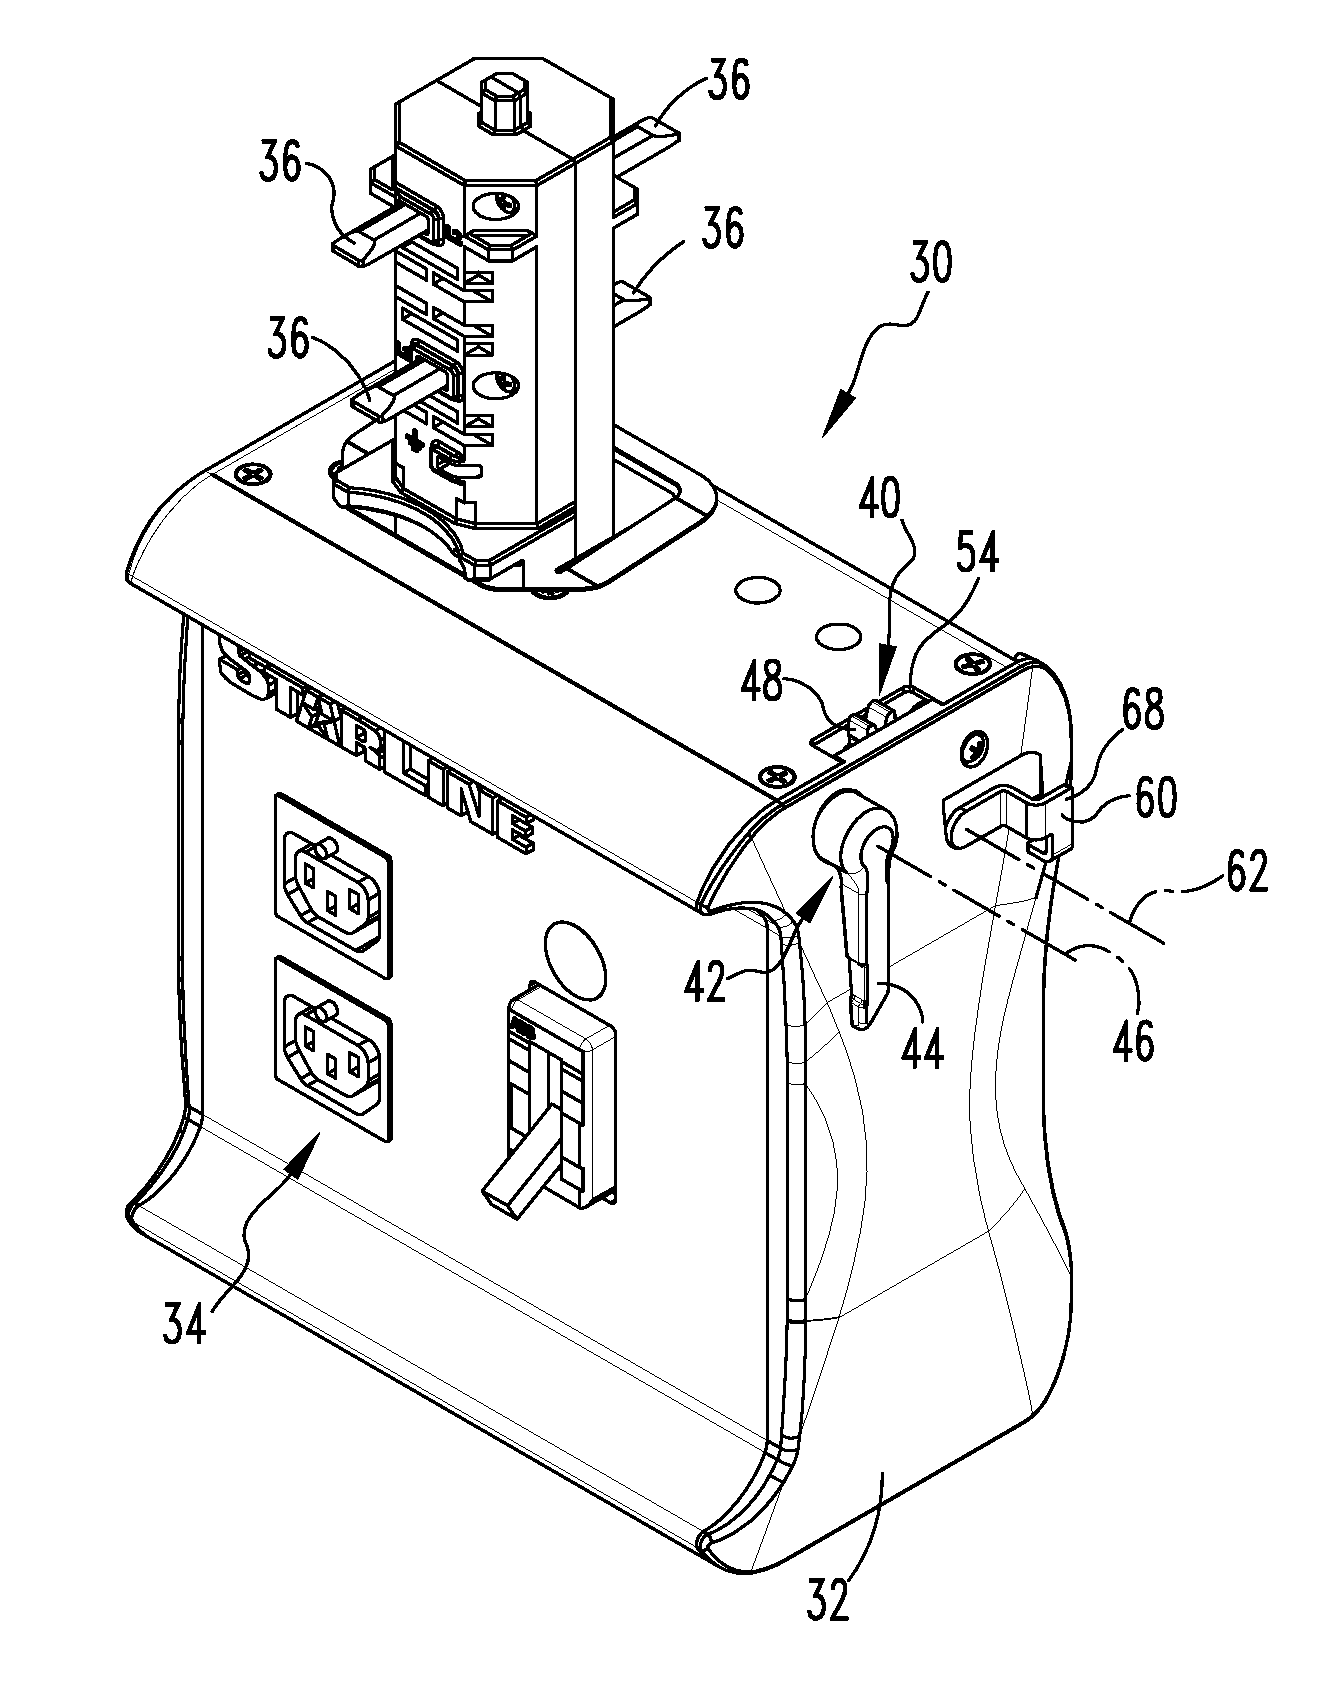 Tool-less busway take-off device for electrical busway and method of installing